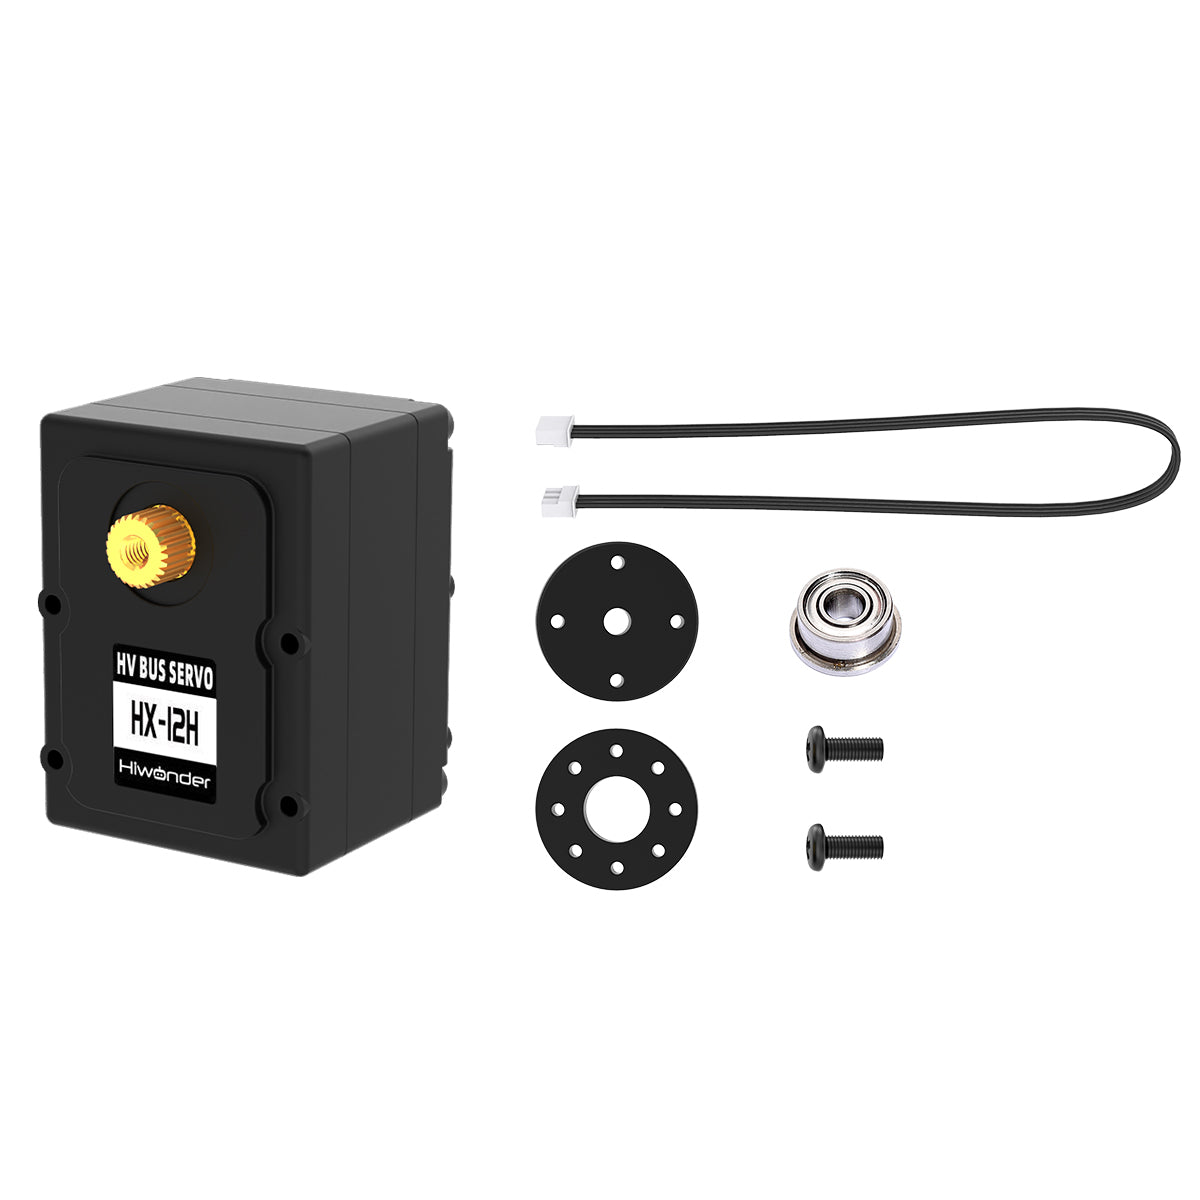 Hiwonder HX-12H Serial Bus High Voltage Servo With Double Shaft, 12KG Torque and Data Feedback Function